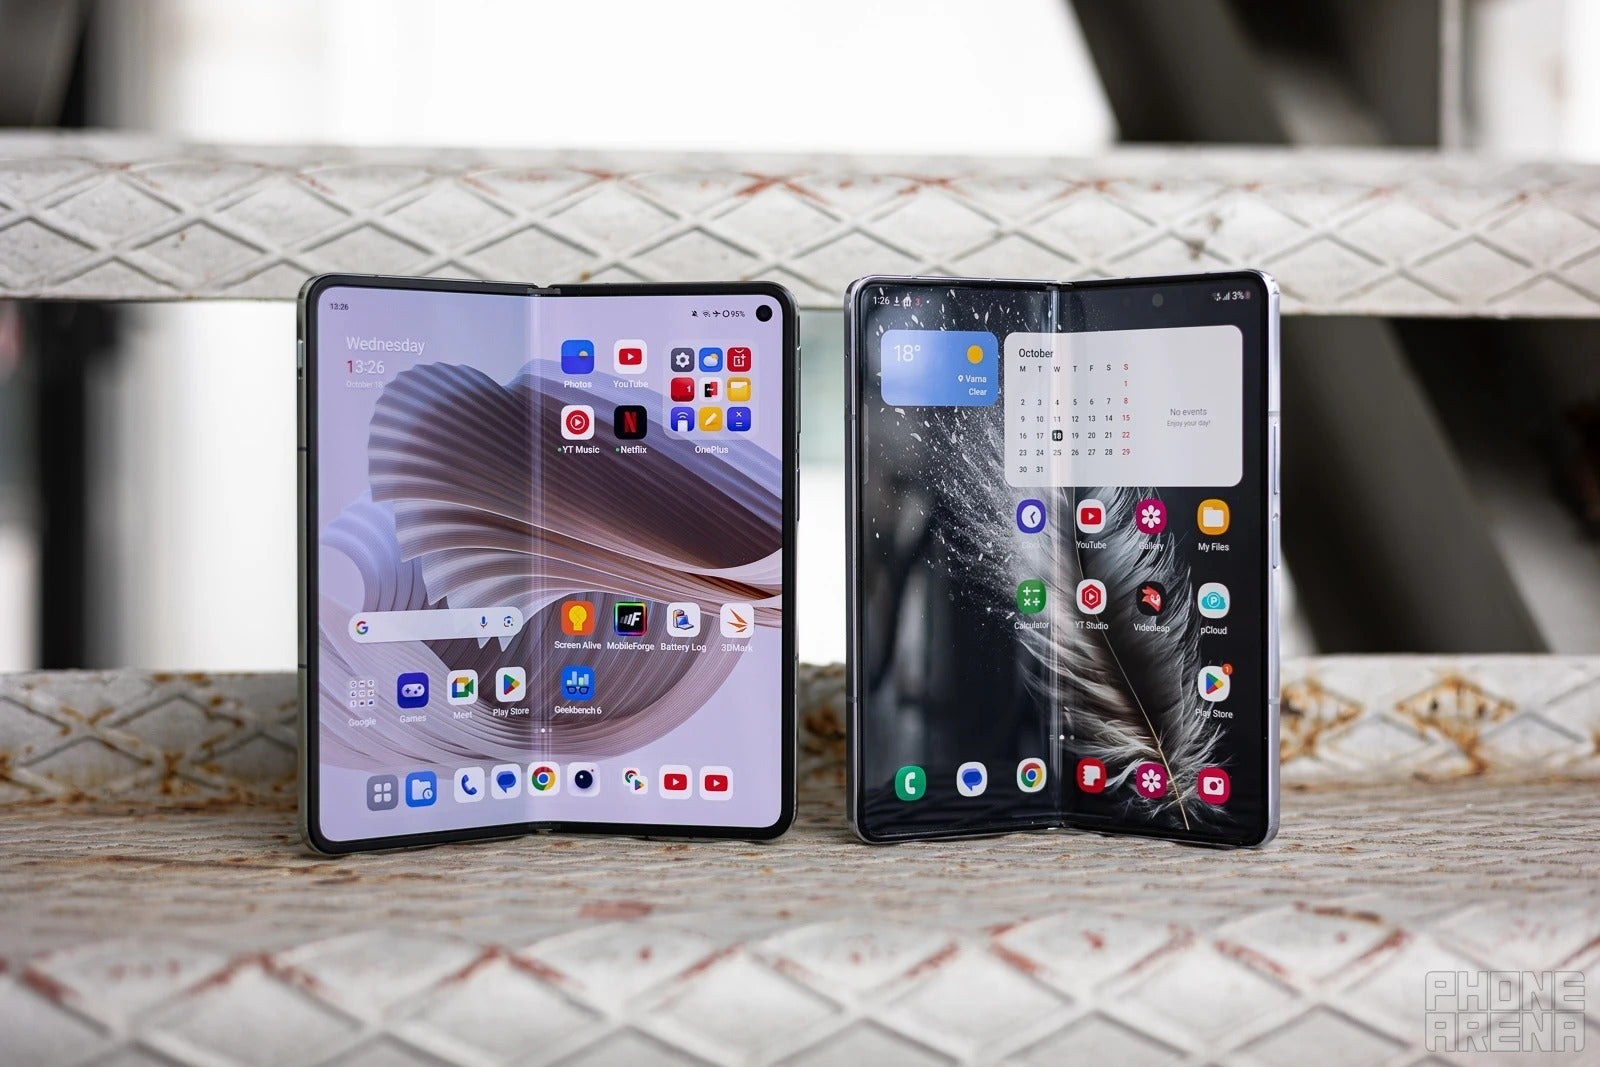 There's no under-display camera on the OnePlus Open... but do we need such an over-complication on deck? - An ode to the OnePlus Open, or why Samsung needs a reality check and rethink Galaxy Z Fold 6